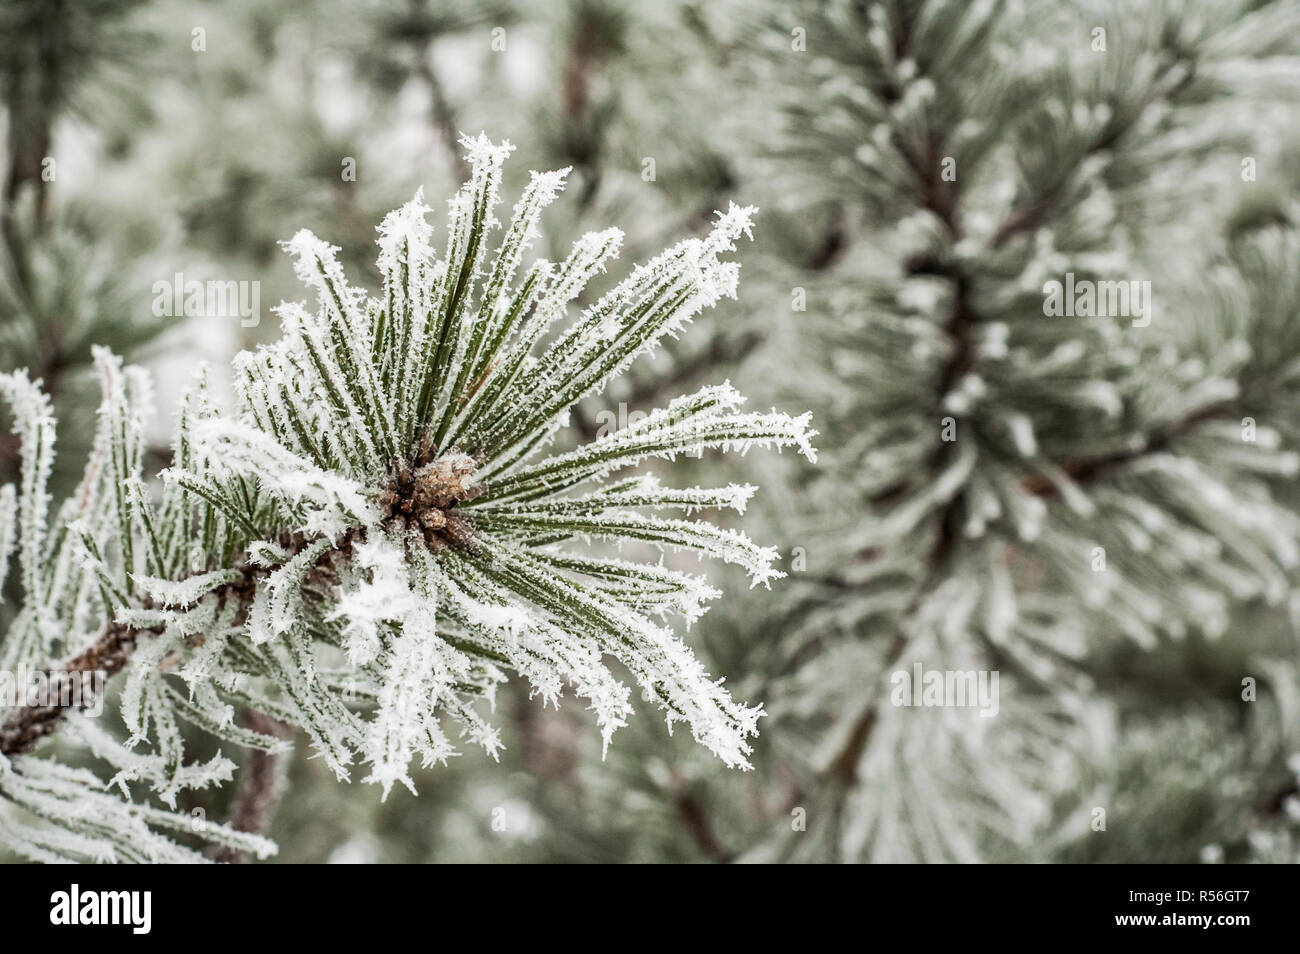 Pine needles covered with frost, close-up Stock Photo